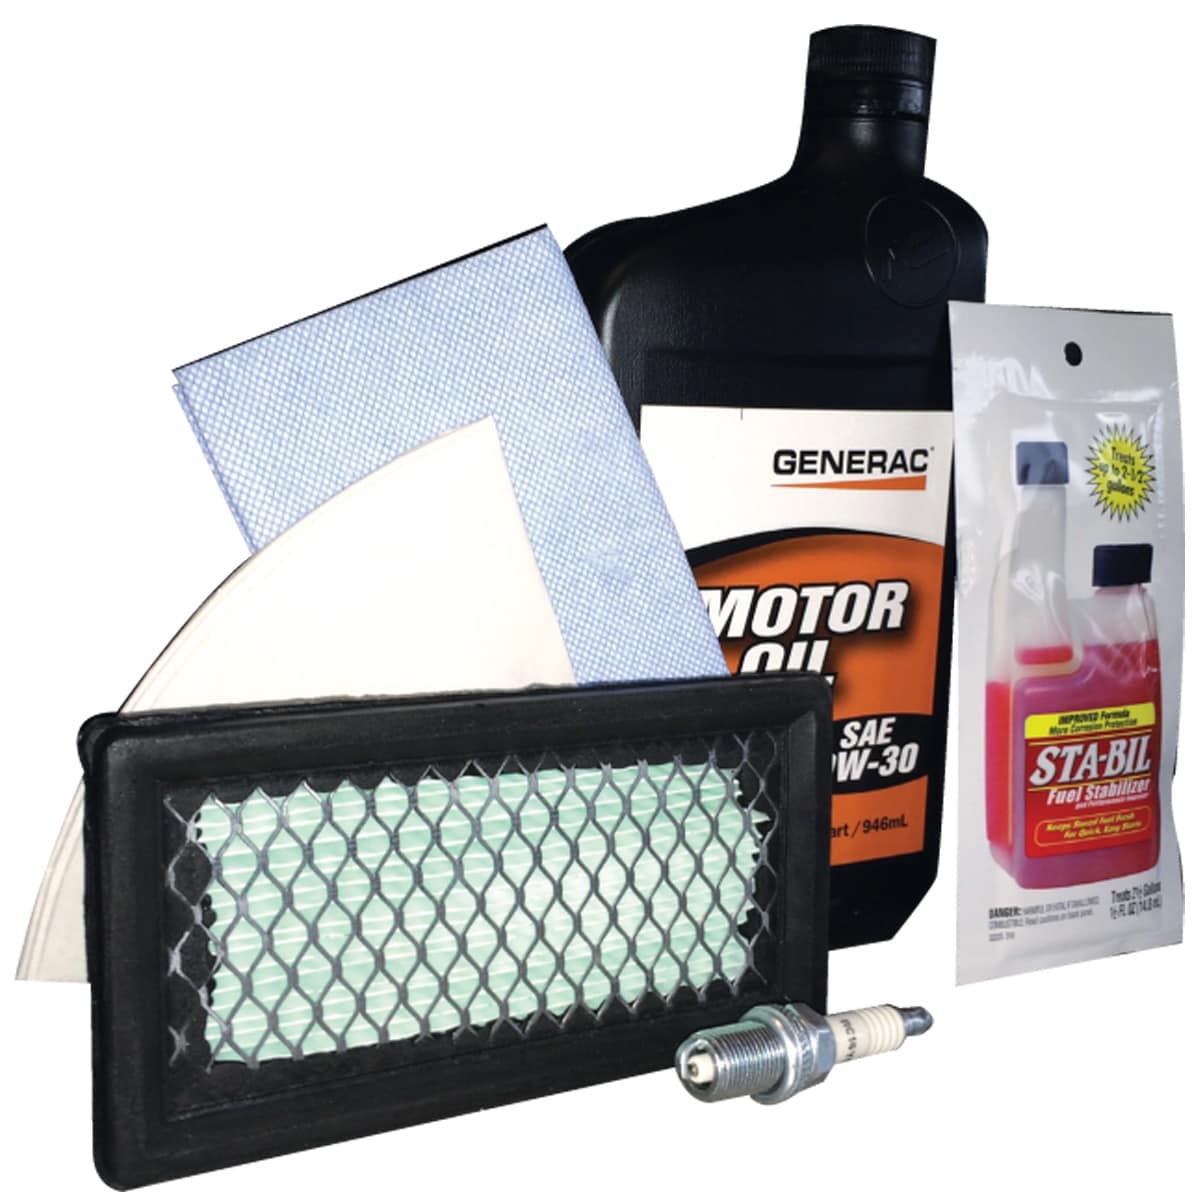 Generac 5721 Portable Maintenance Kit for 992cc Engines Free Shipping New